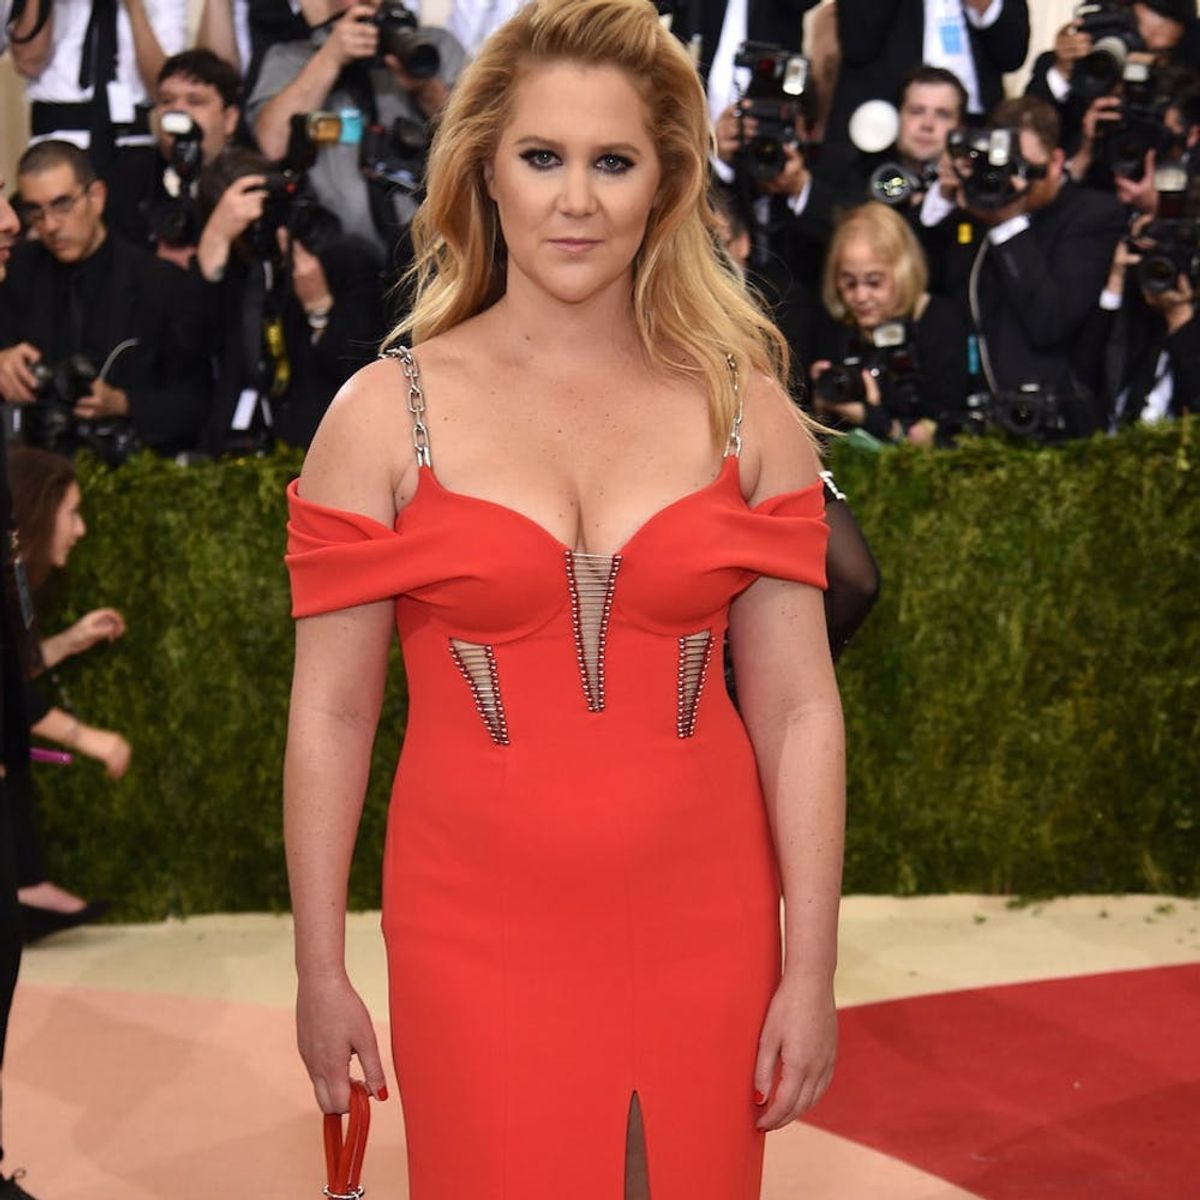 Amy Schumer Proved She Gets Chub Rub Just Like the Rest of Us